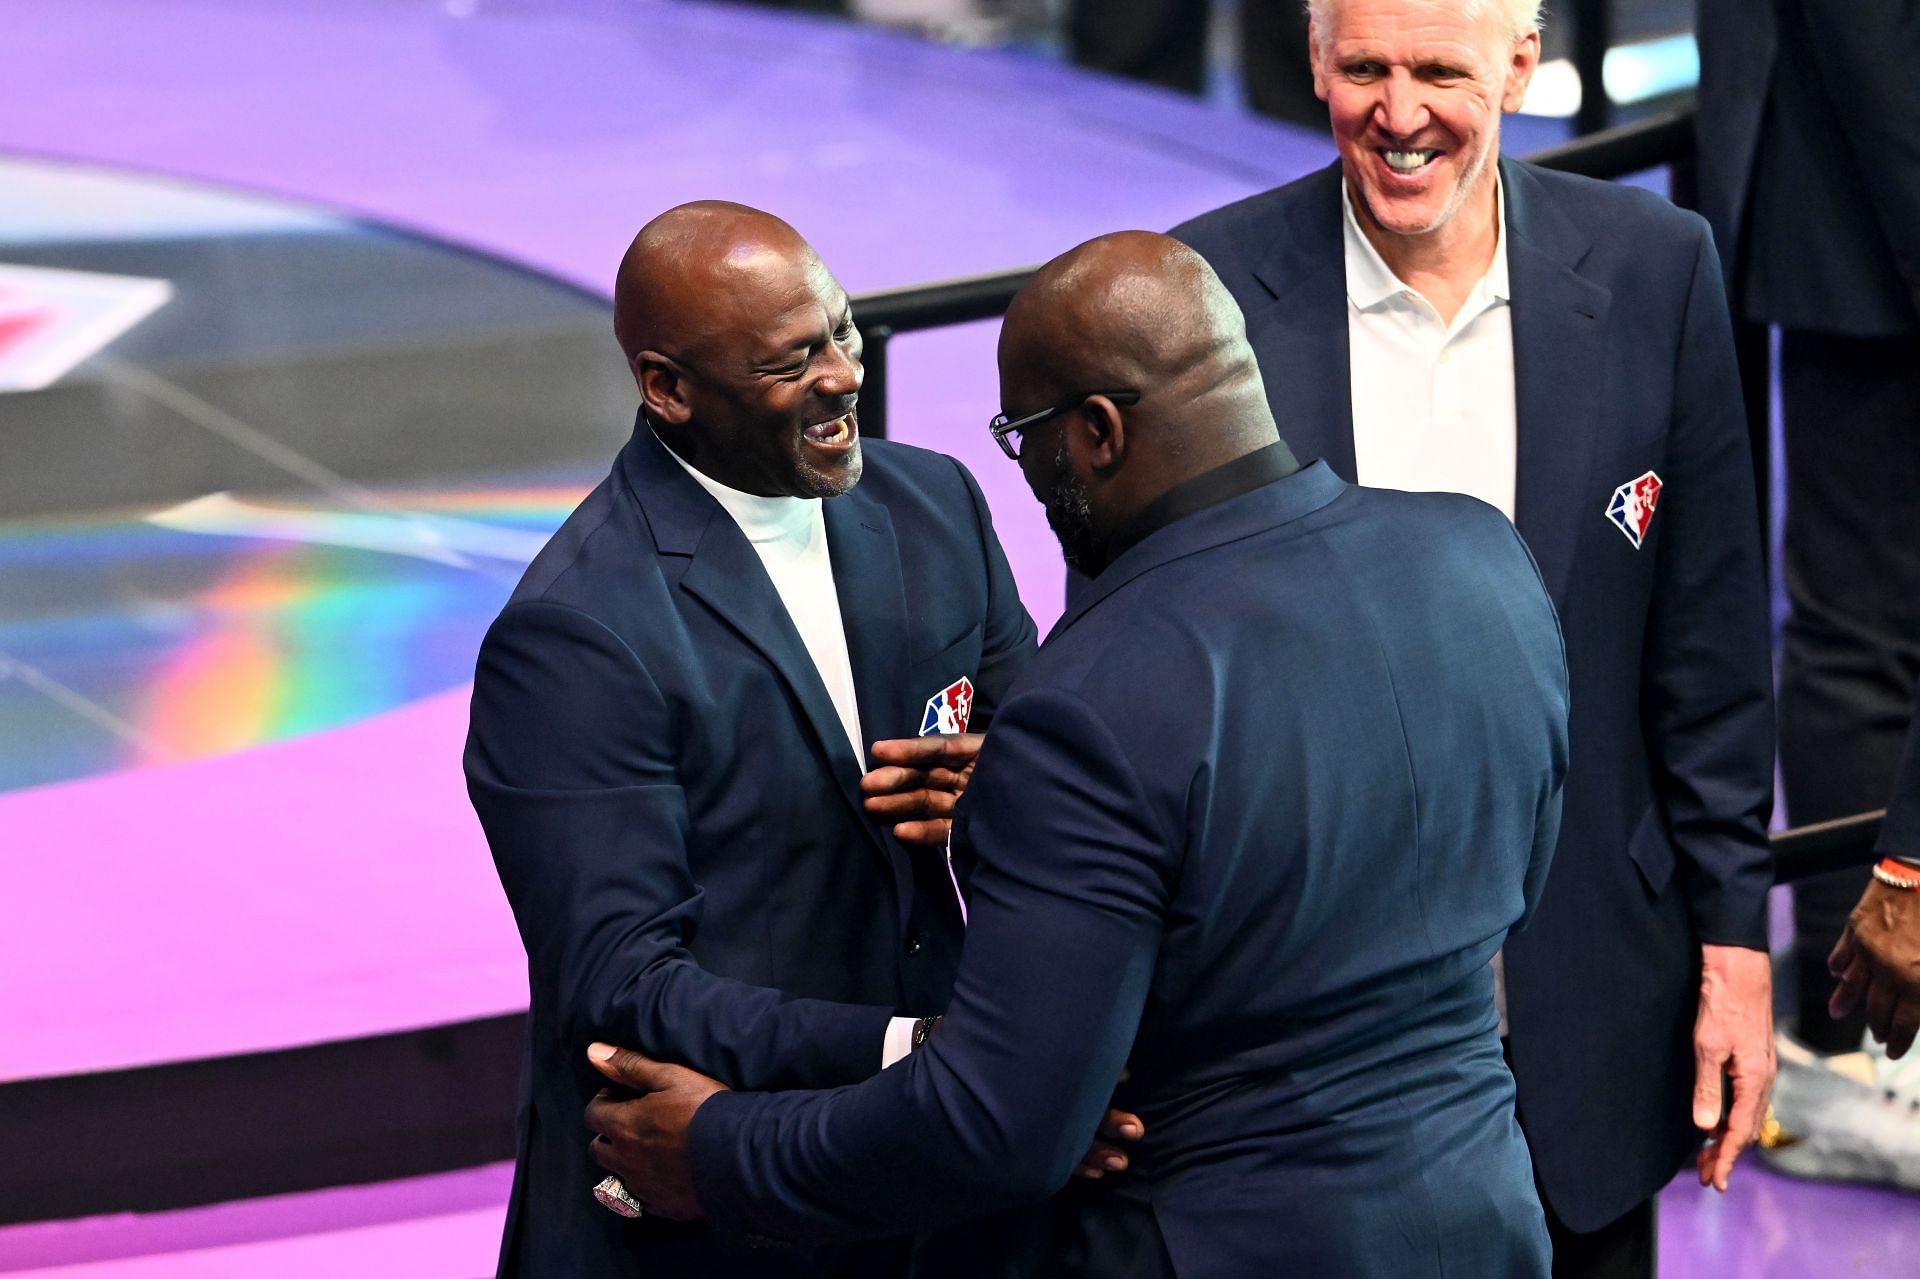 Shaquille O'Neal claims Jordan, Hakeem and Bird would get swept against  him, Kobe, and LeBron: "IN A SEVEN GAME SERIES THEY GET SWEPT"